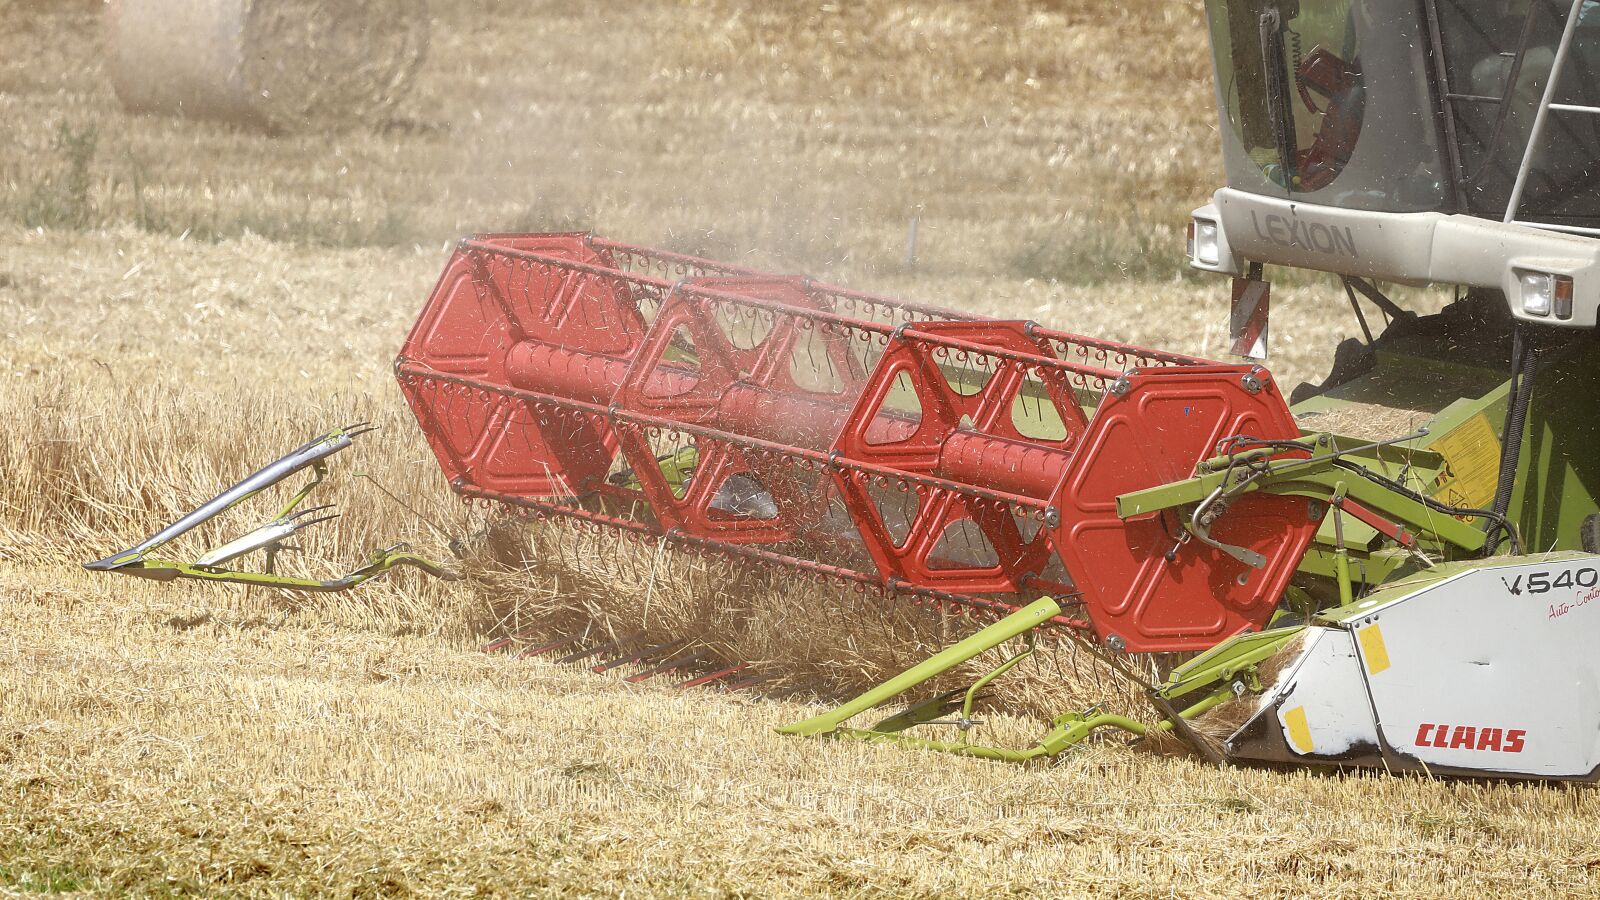 Canon EOS R sample photo. Harvest, combine harvester, agriculture photography